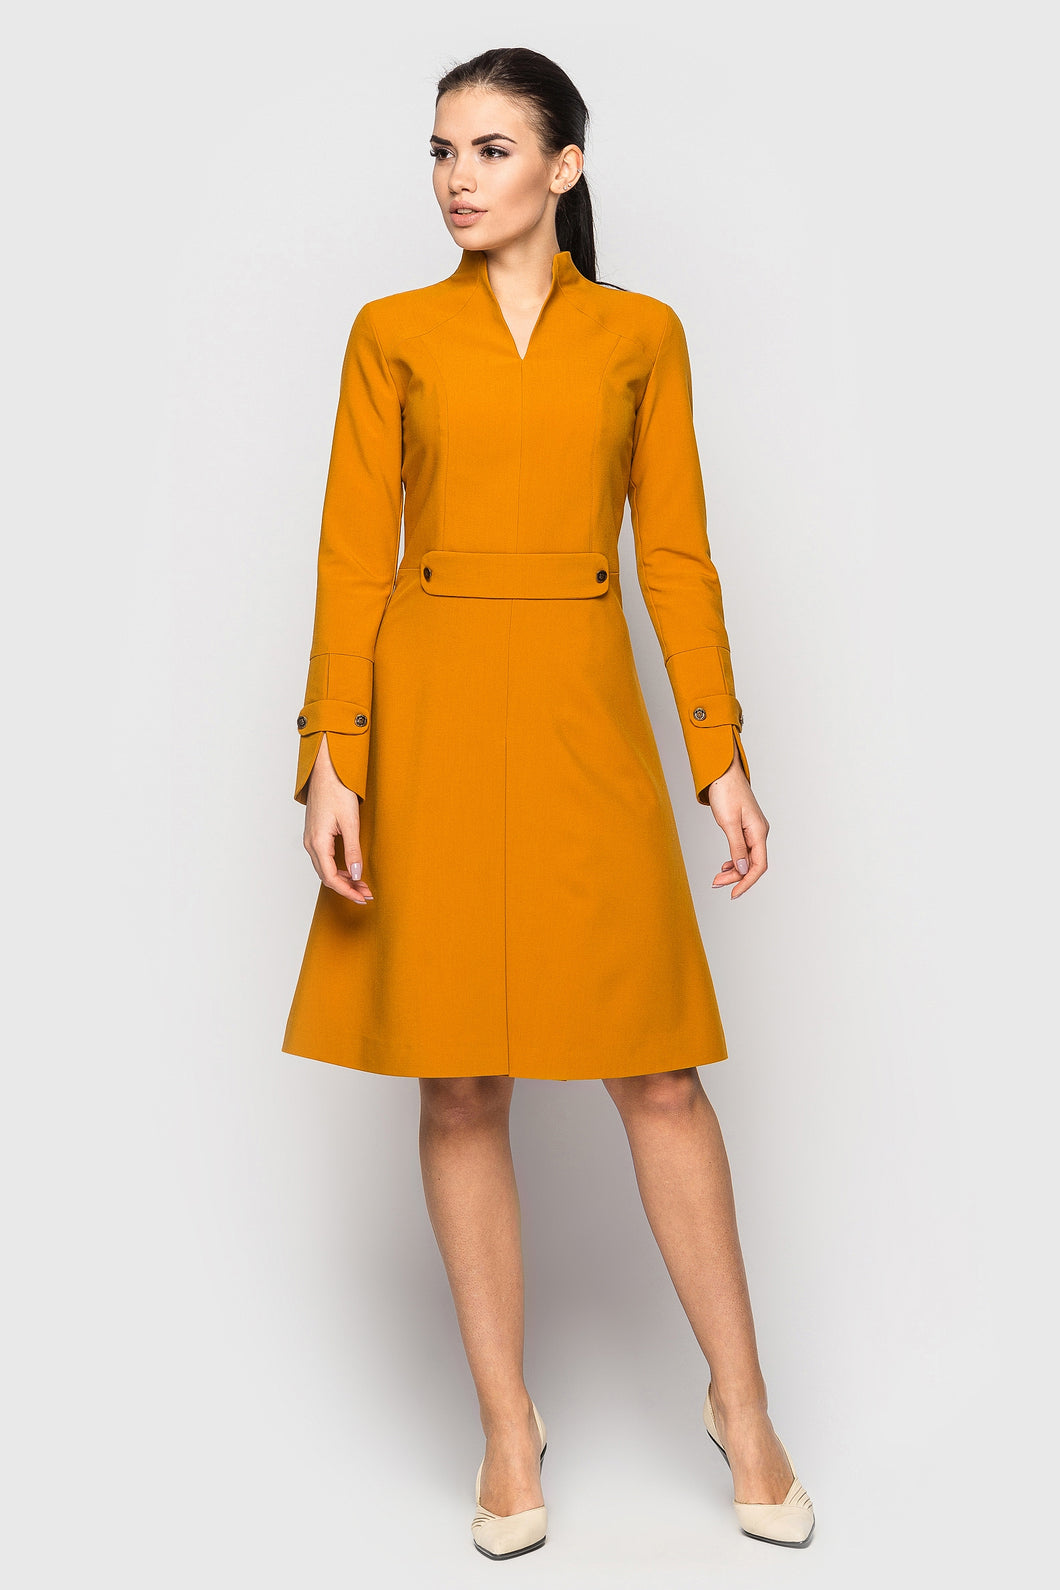 Mustard Fit & flare Cocktail Dress